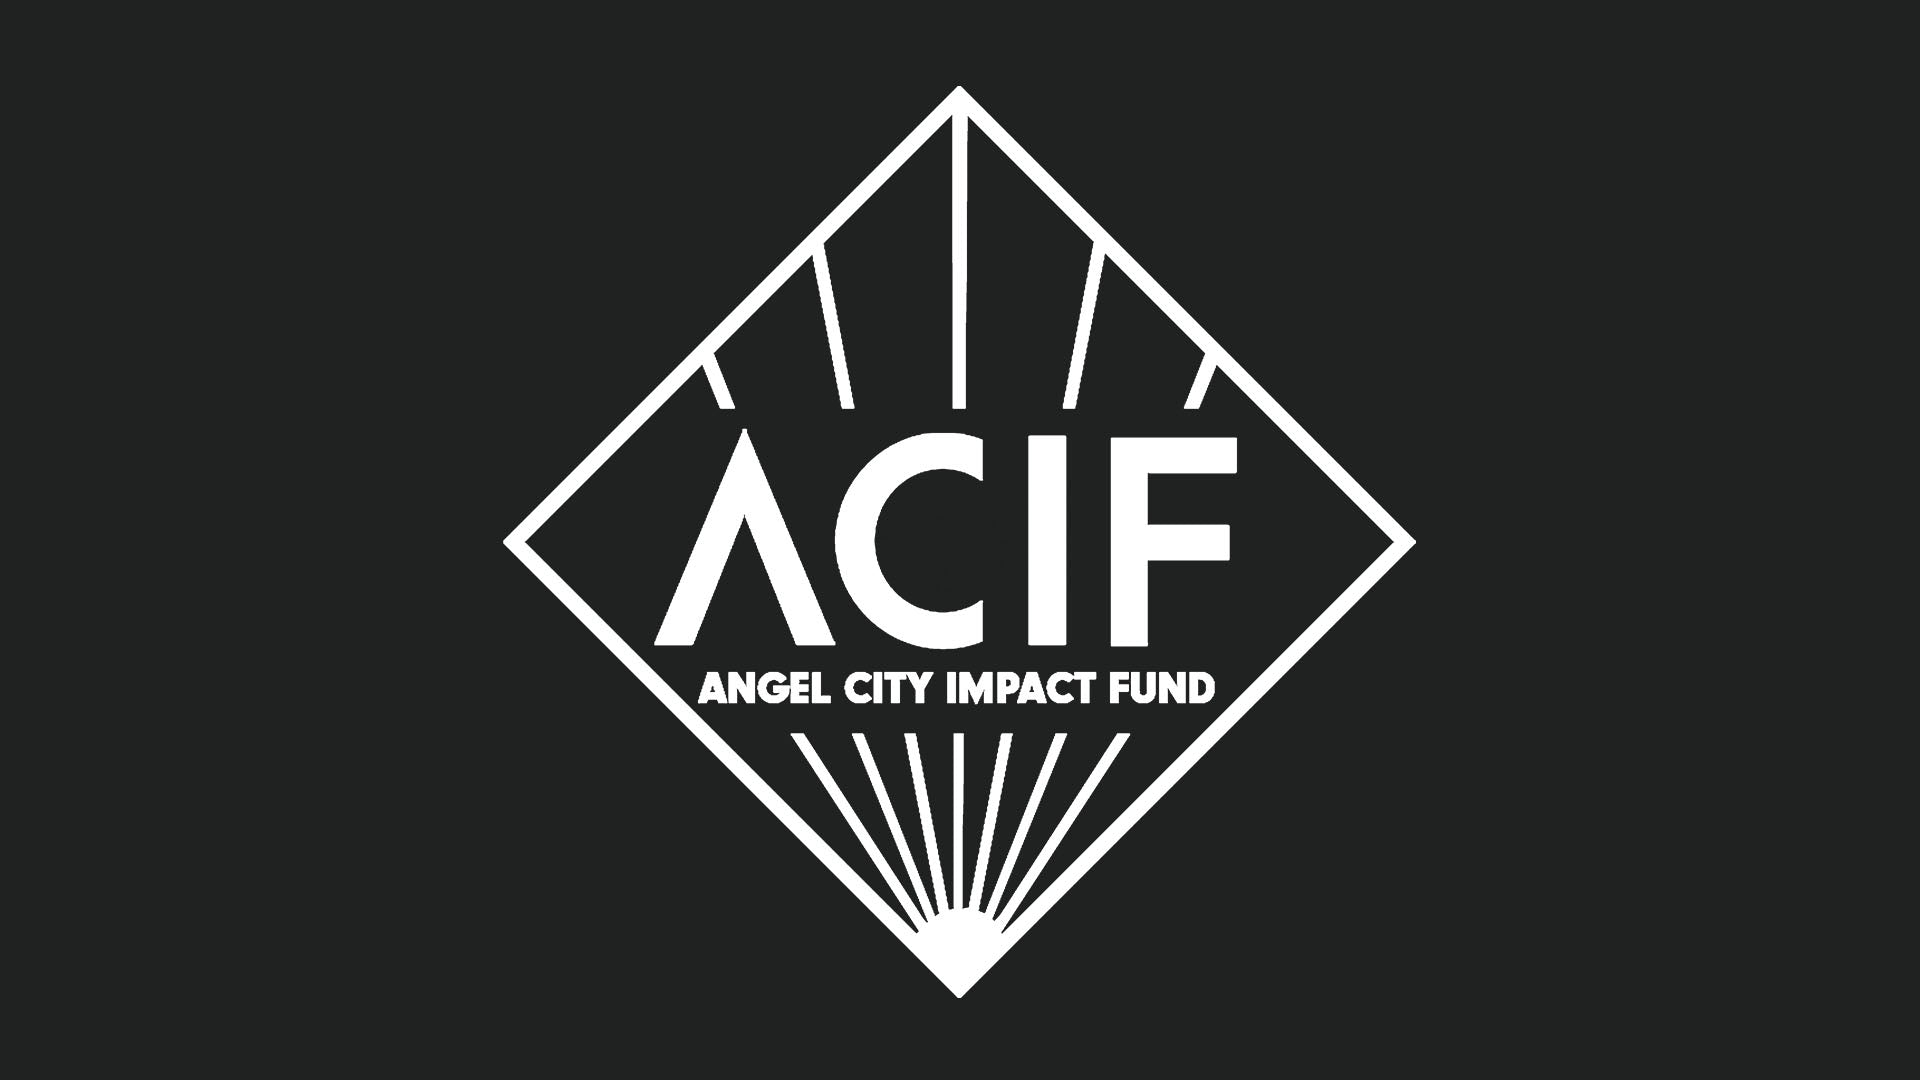 ACFC Launches the Angel City Impact Fund